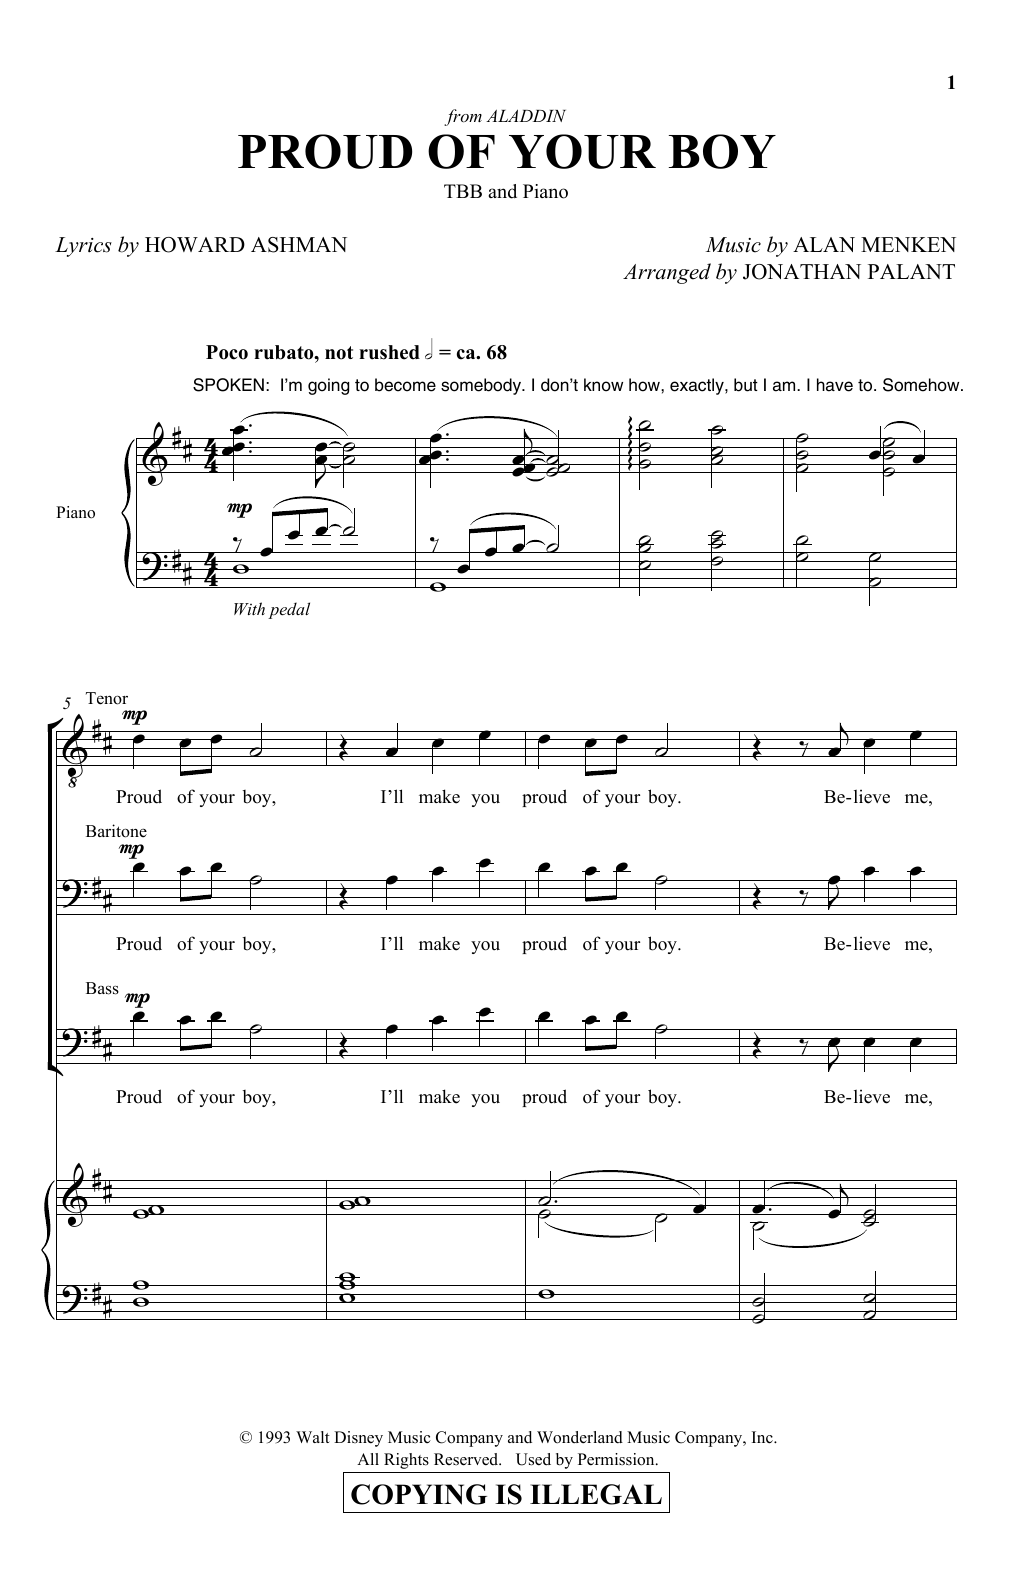 Download Howard Ashman and Alan Menken Proud Of Your Boy (from Aladdin: The Br Sheet Music